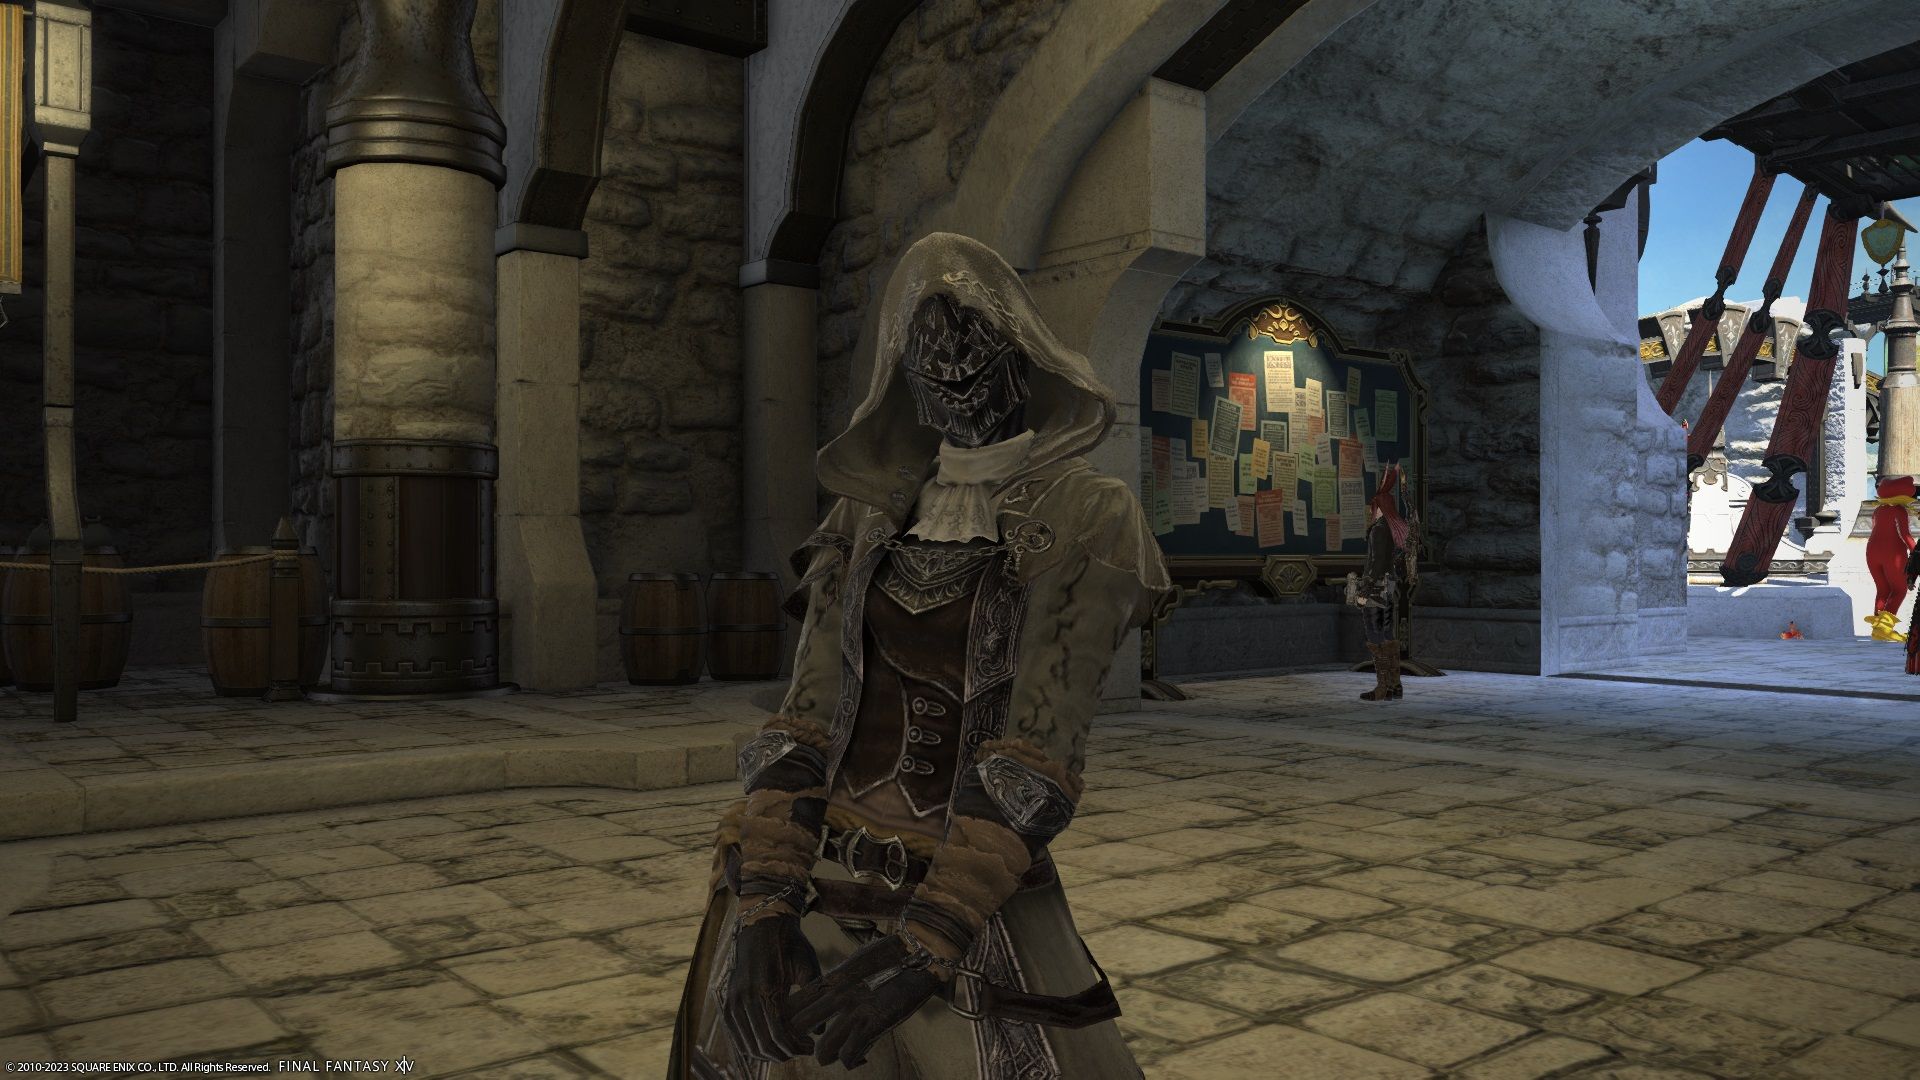 Final Fantasy 14 - A character standing in Limsa Lominsa in Cryptlurker bard gear.